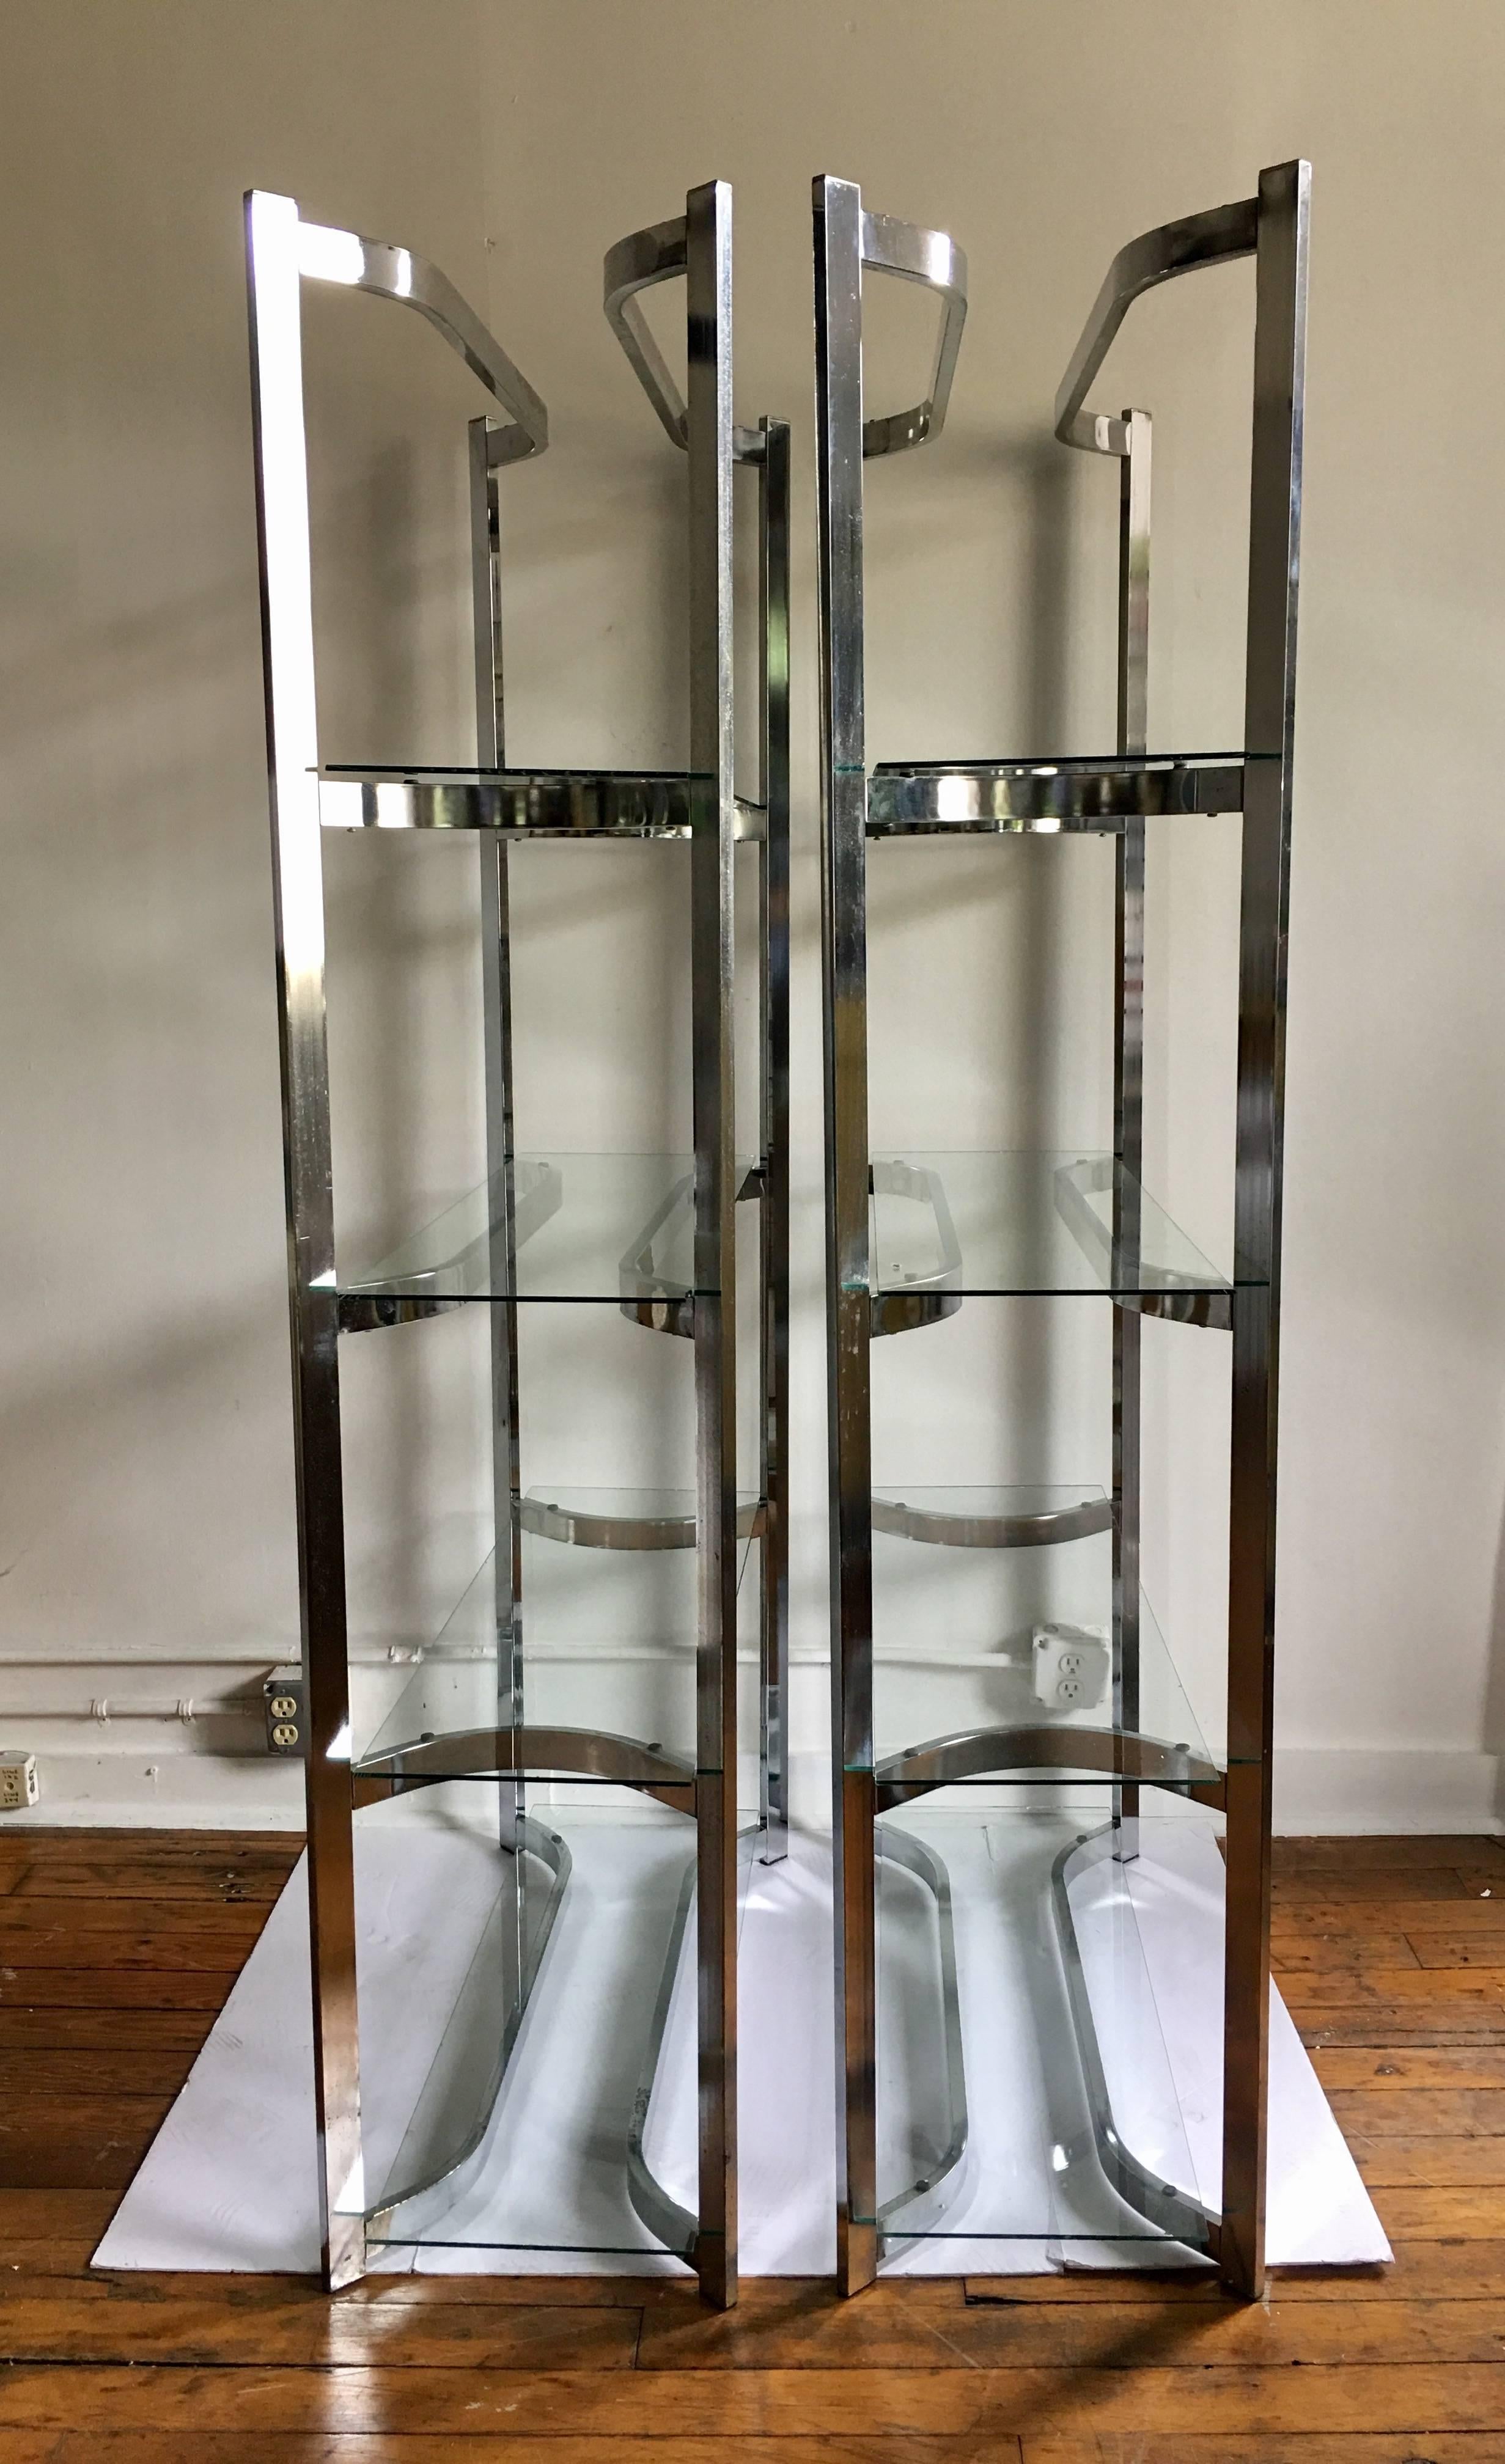 Pair of Mid-Century Modern chrome and glass étagères. These shelving/bookcases feature curved sculptural frames with removable clear glass shelves.